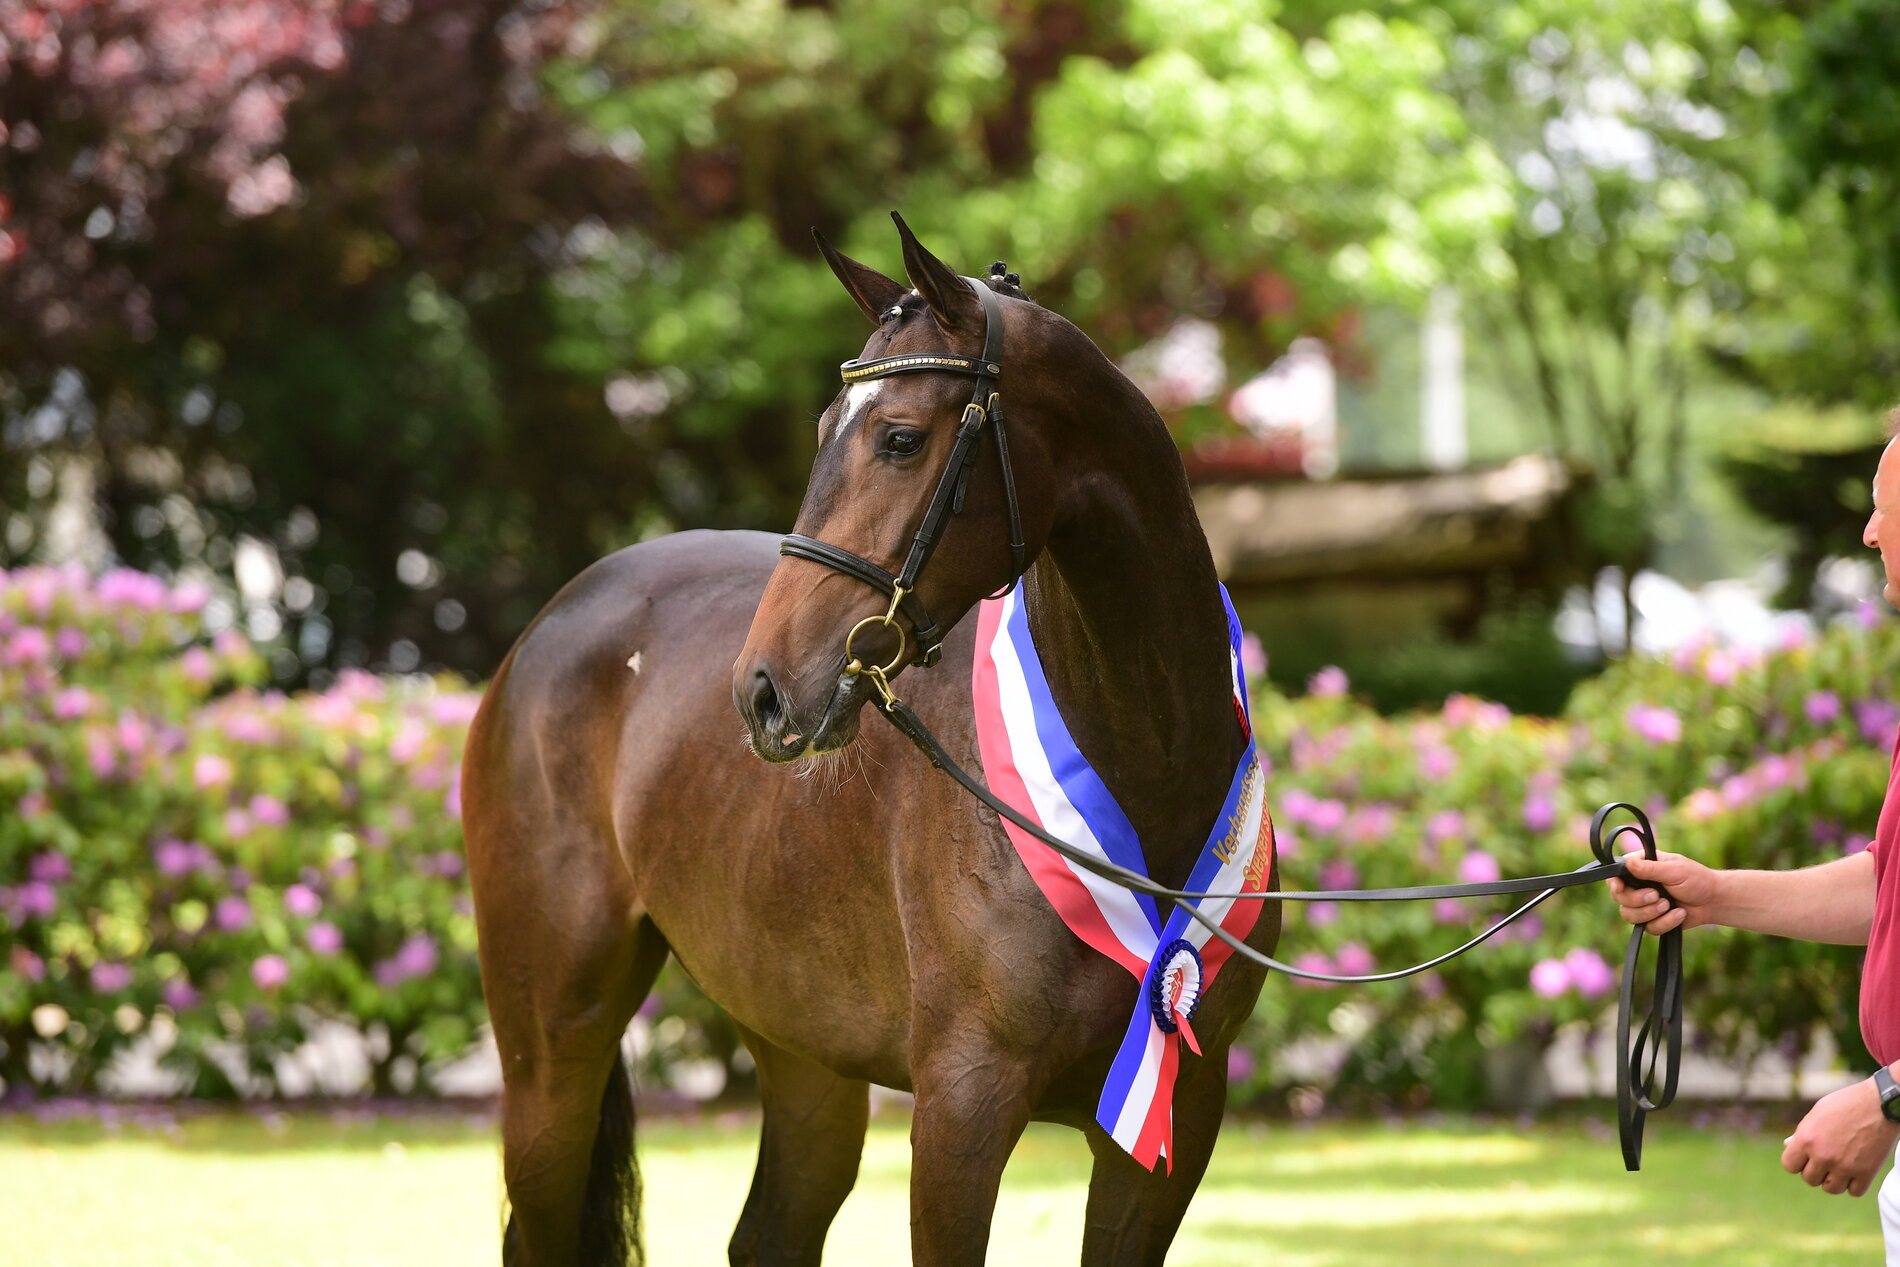 Champion of the Verband Mare Show 2022: Melypsa by  Barcley - Armand xx (St.223B), breeder and owner: Sönke Eggers, Struvenhütten (photo: Janne Bugtrup)